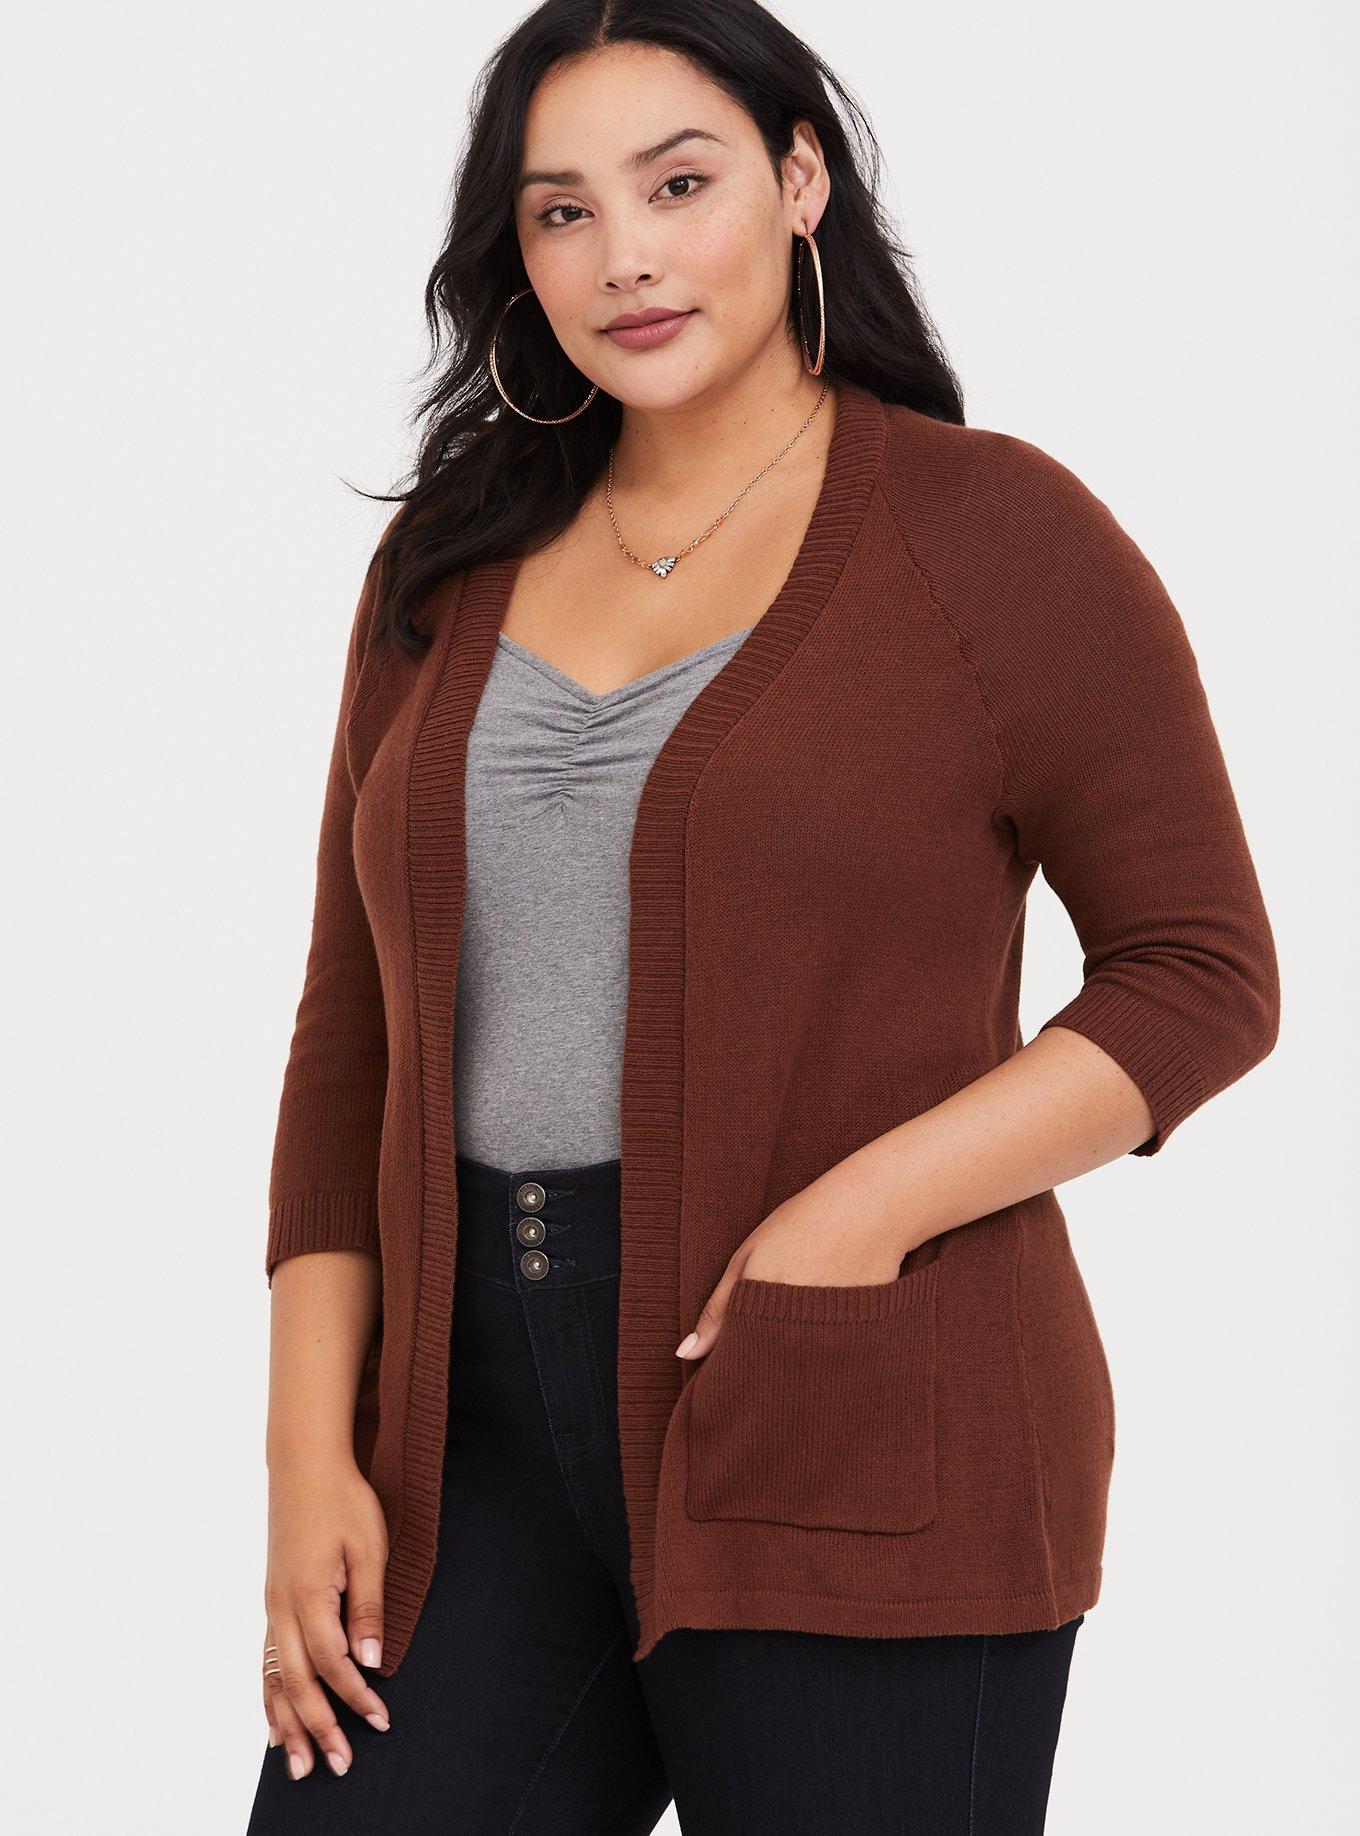 Plus Size - Brown Open Stitched Cardigan - Torrid